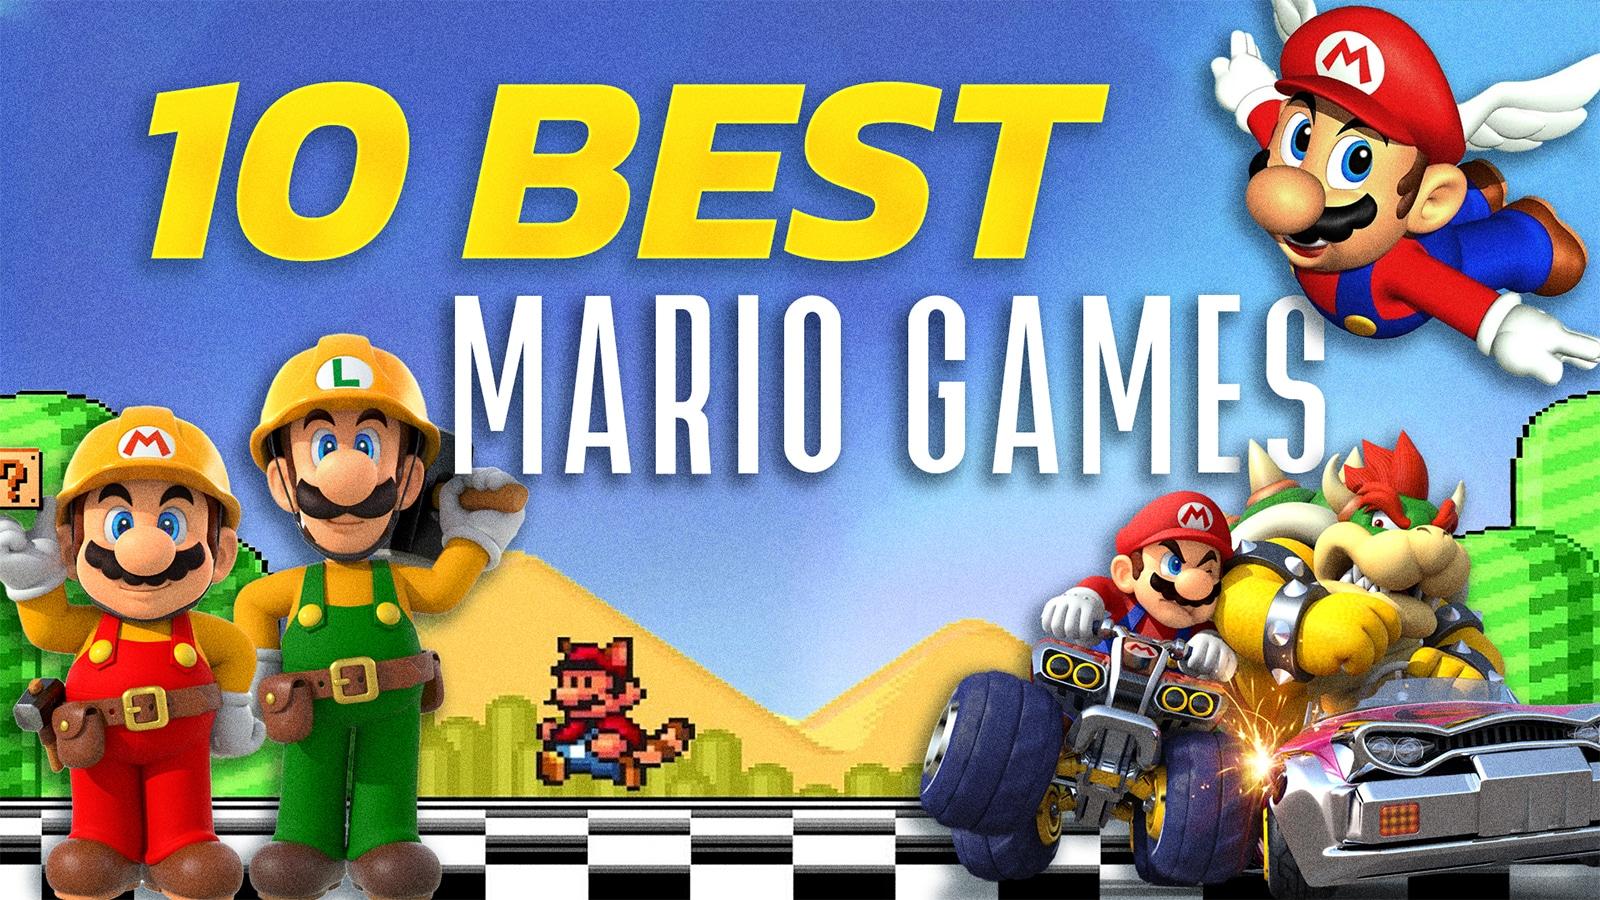 A collage of some of the best Mario games like Kart and 64